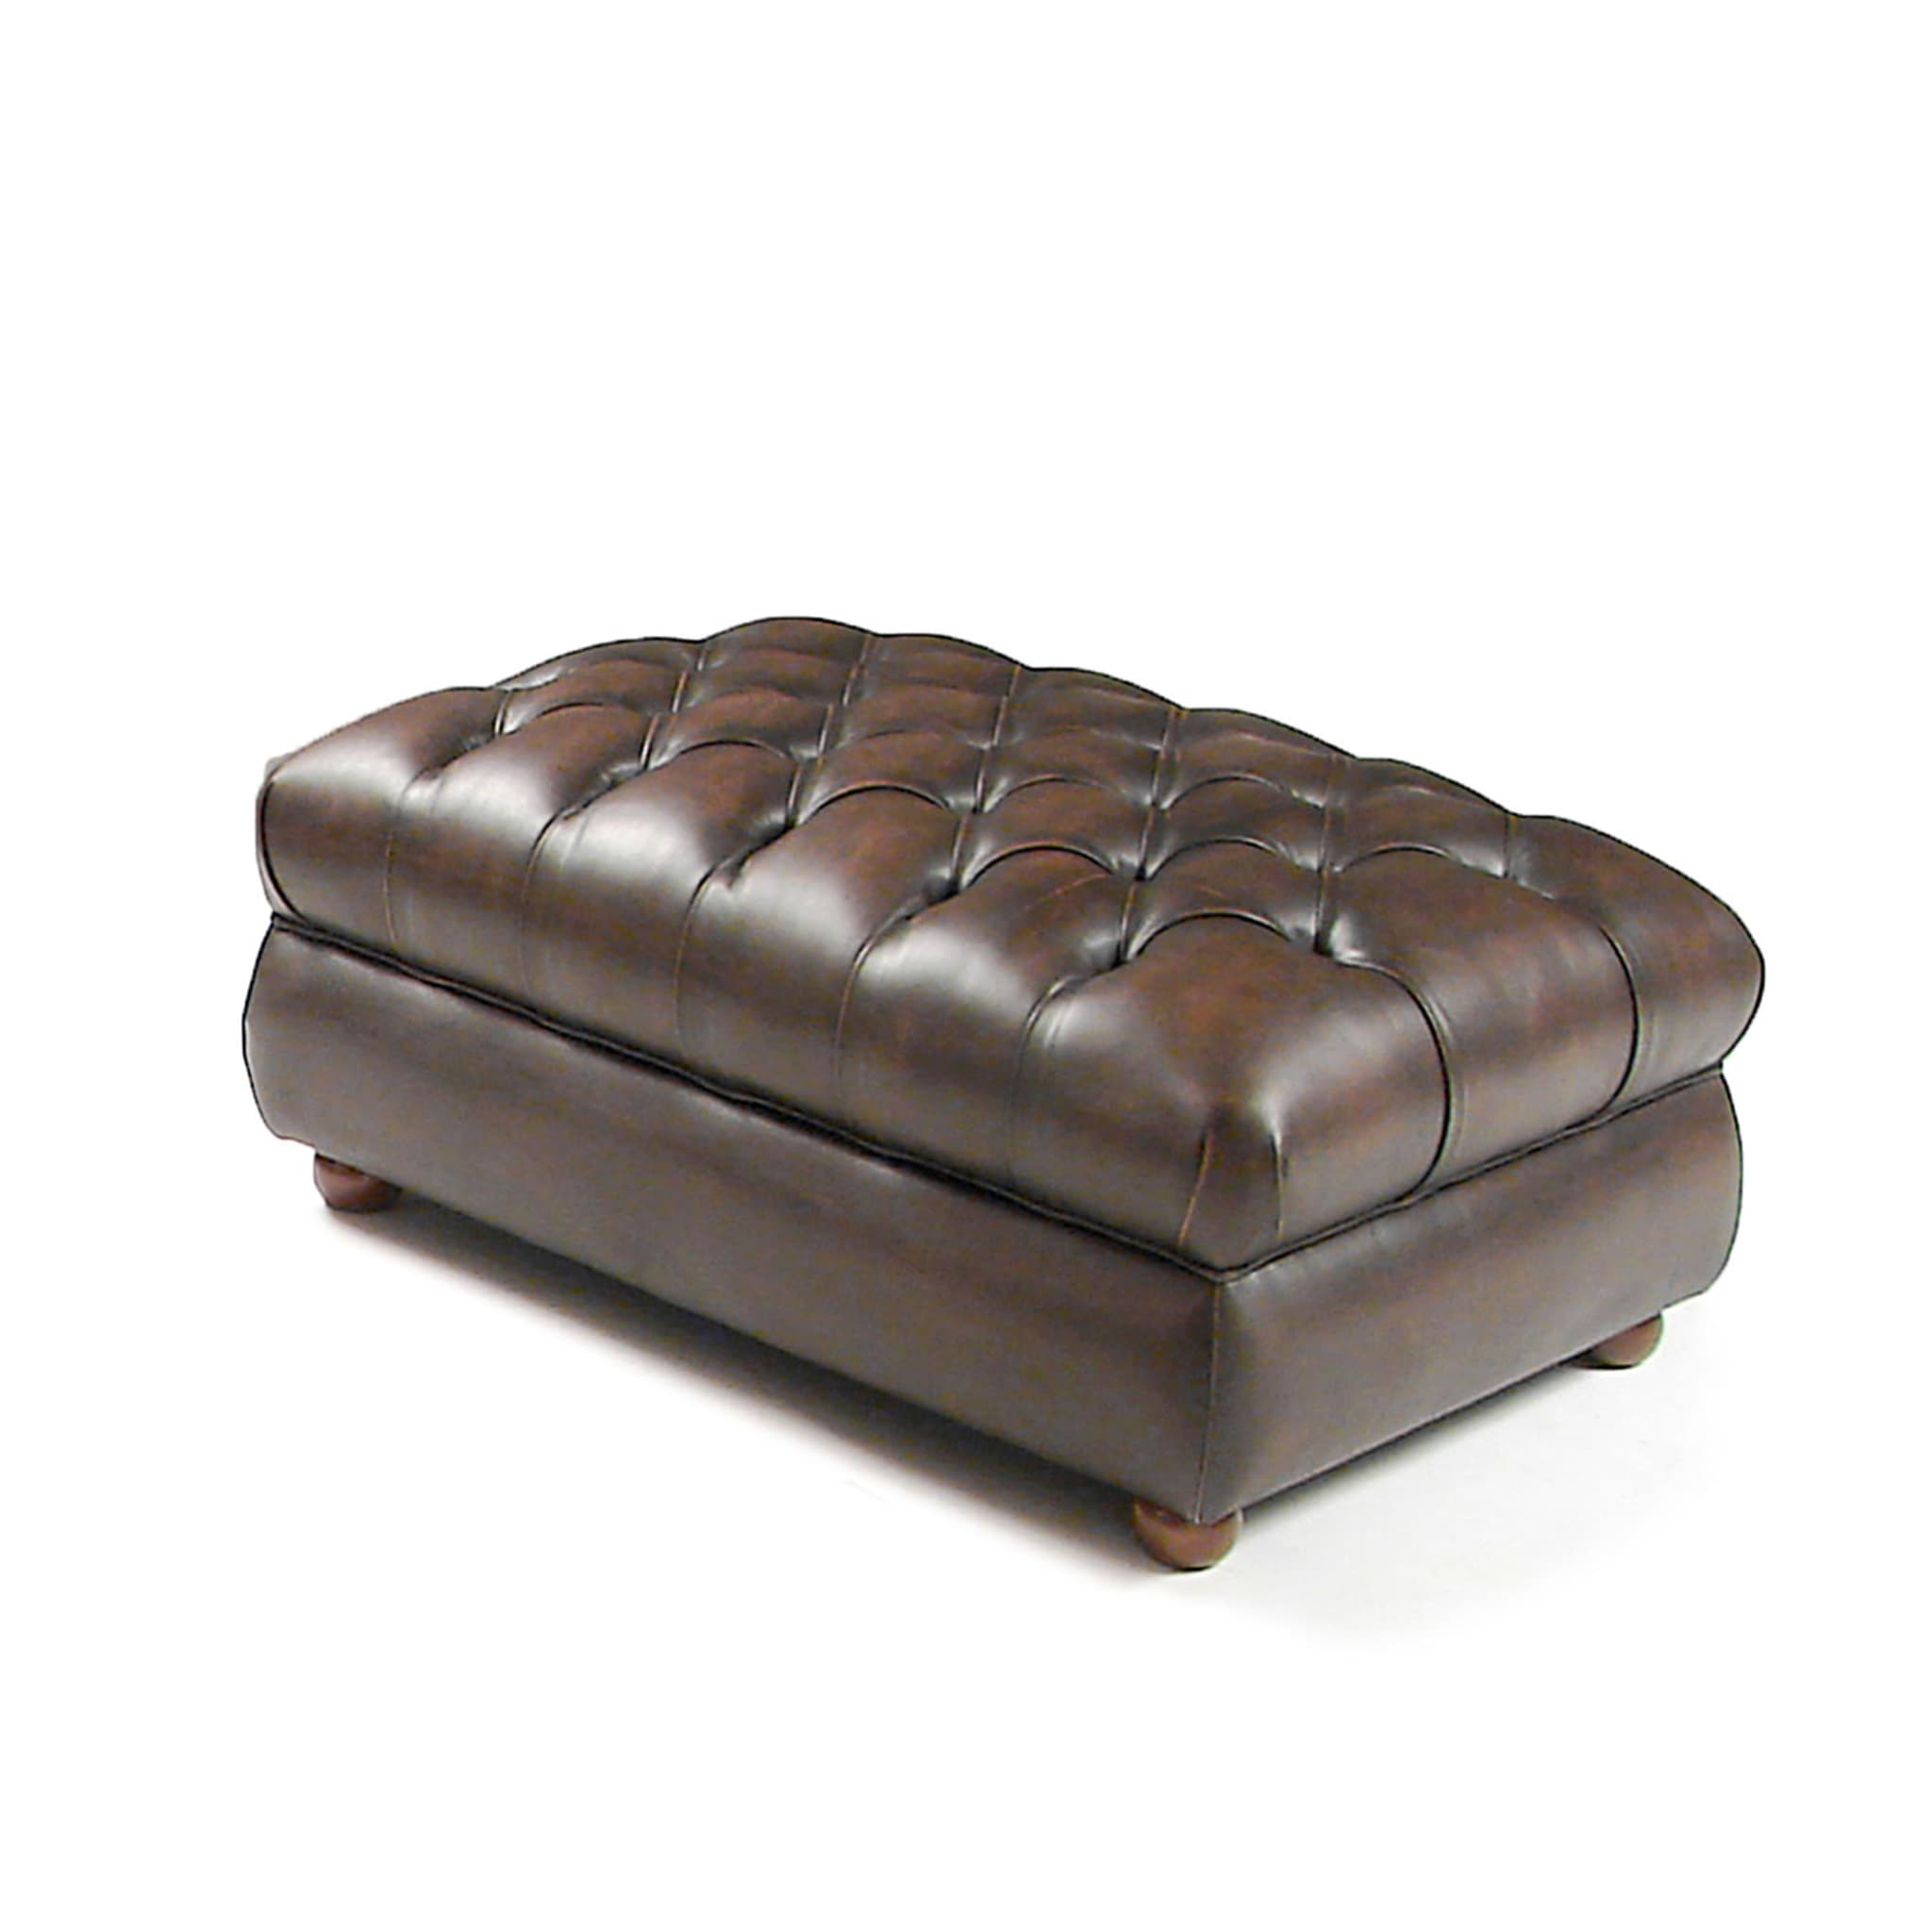 Chesterfield Brown Leather Pouf - Alternative view 1